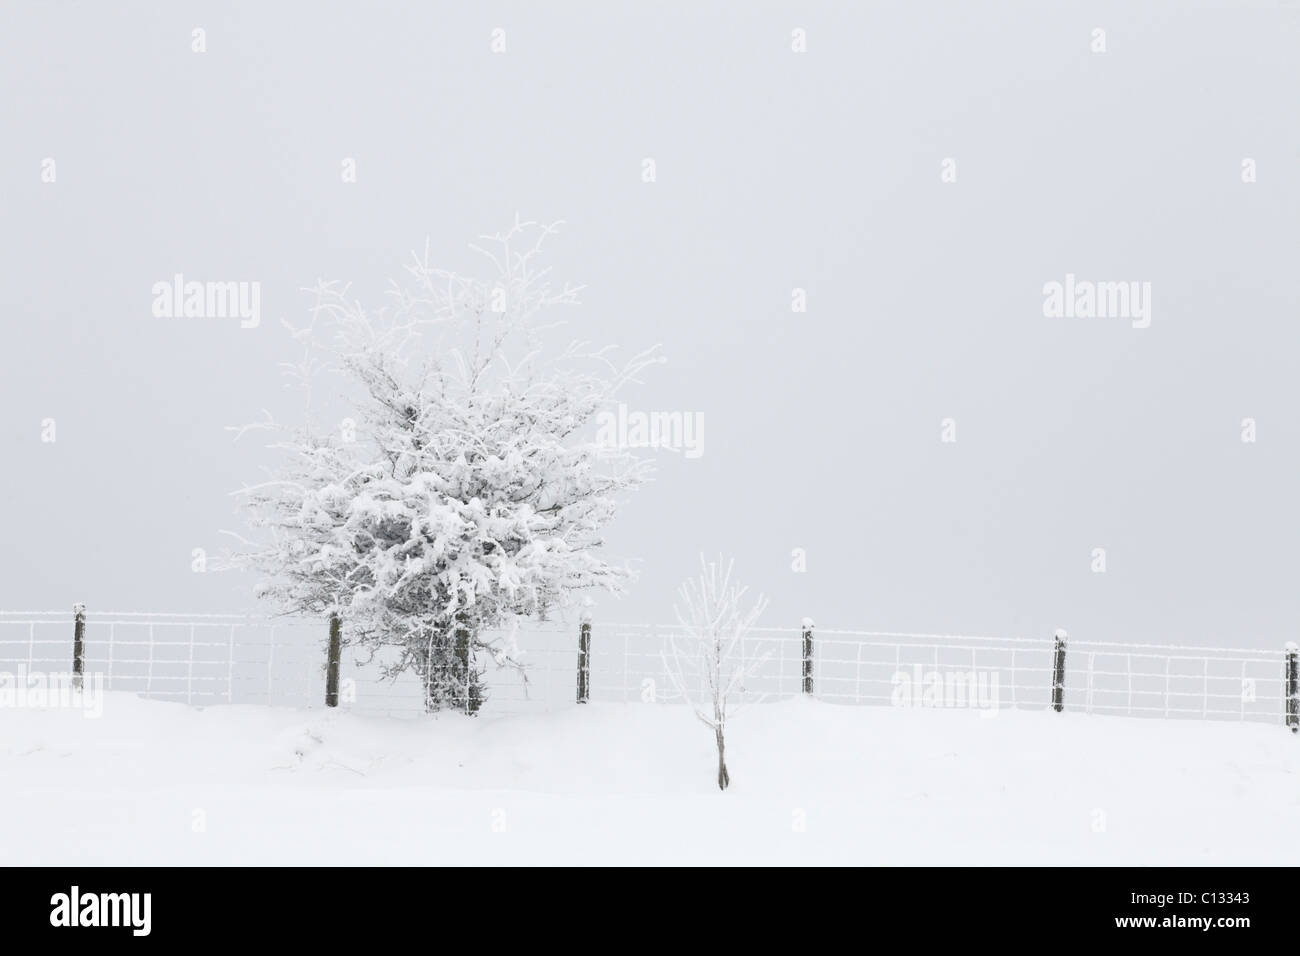 Common Hawthorn (Crataegus monogyna) and a fence after a heavy fall of snow. Powys, Wales. December. Stock Photo